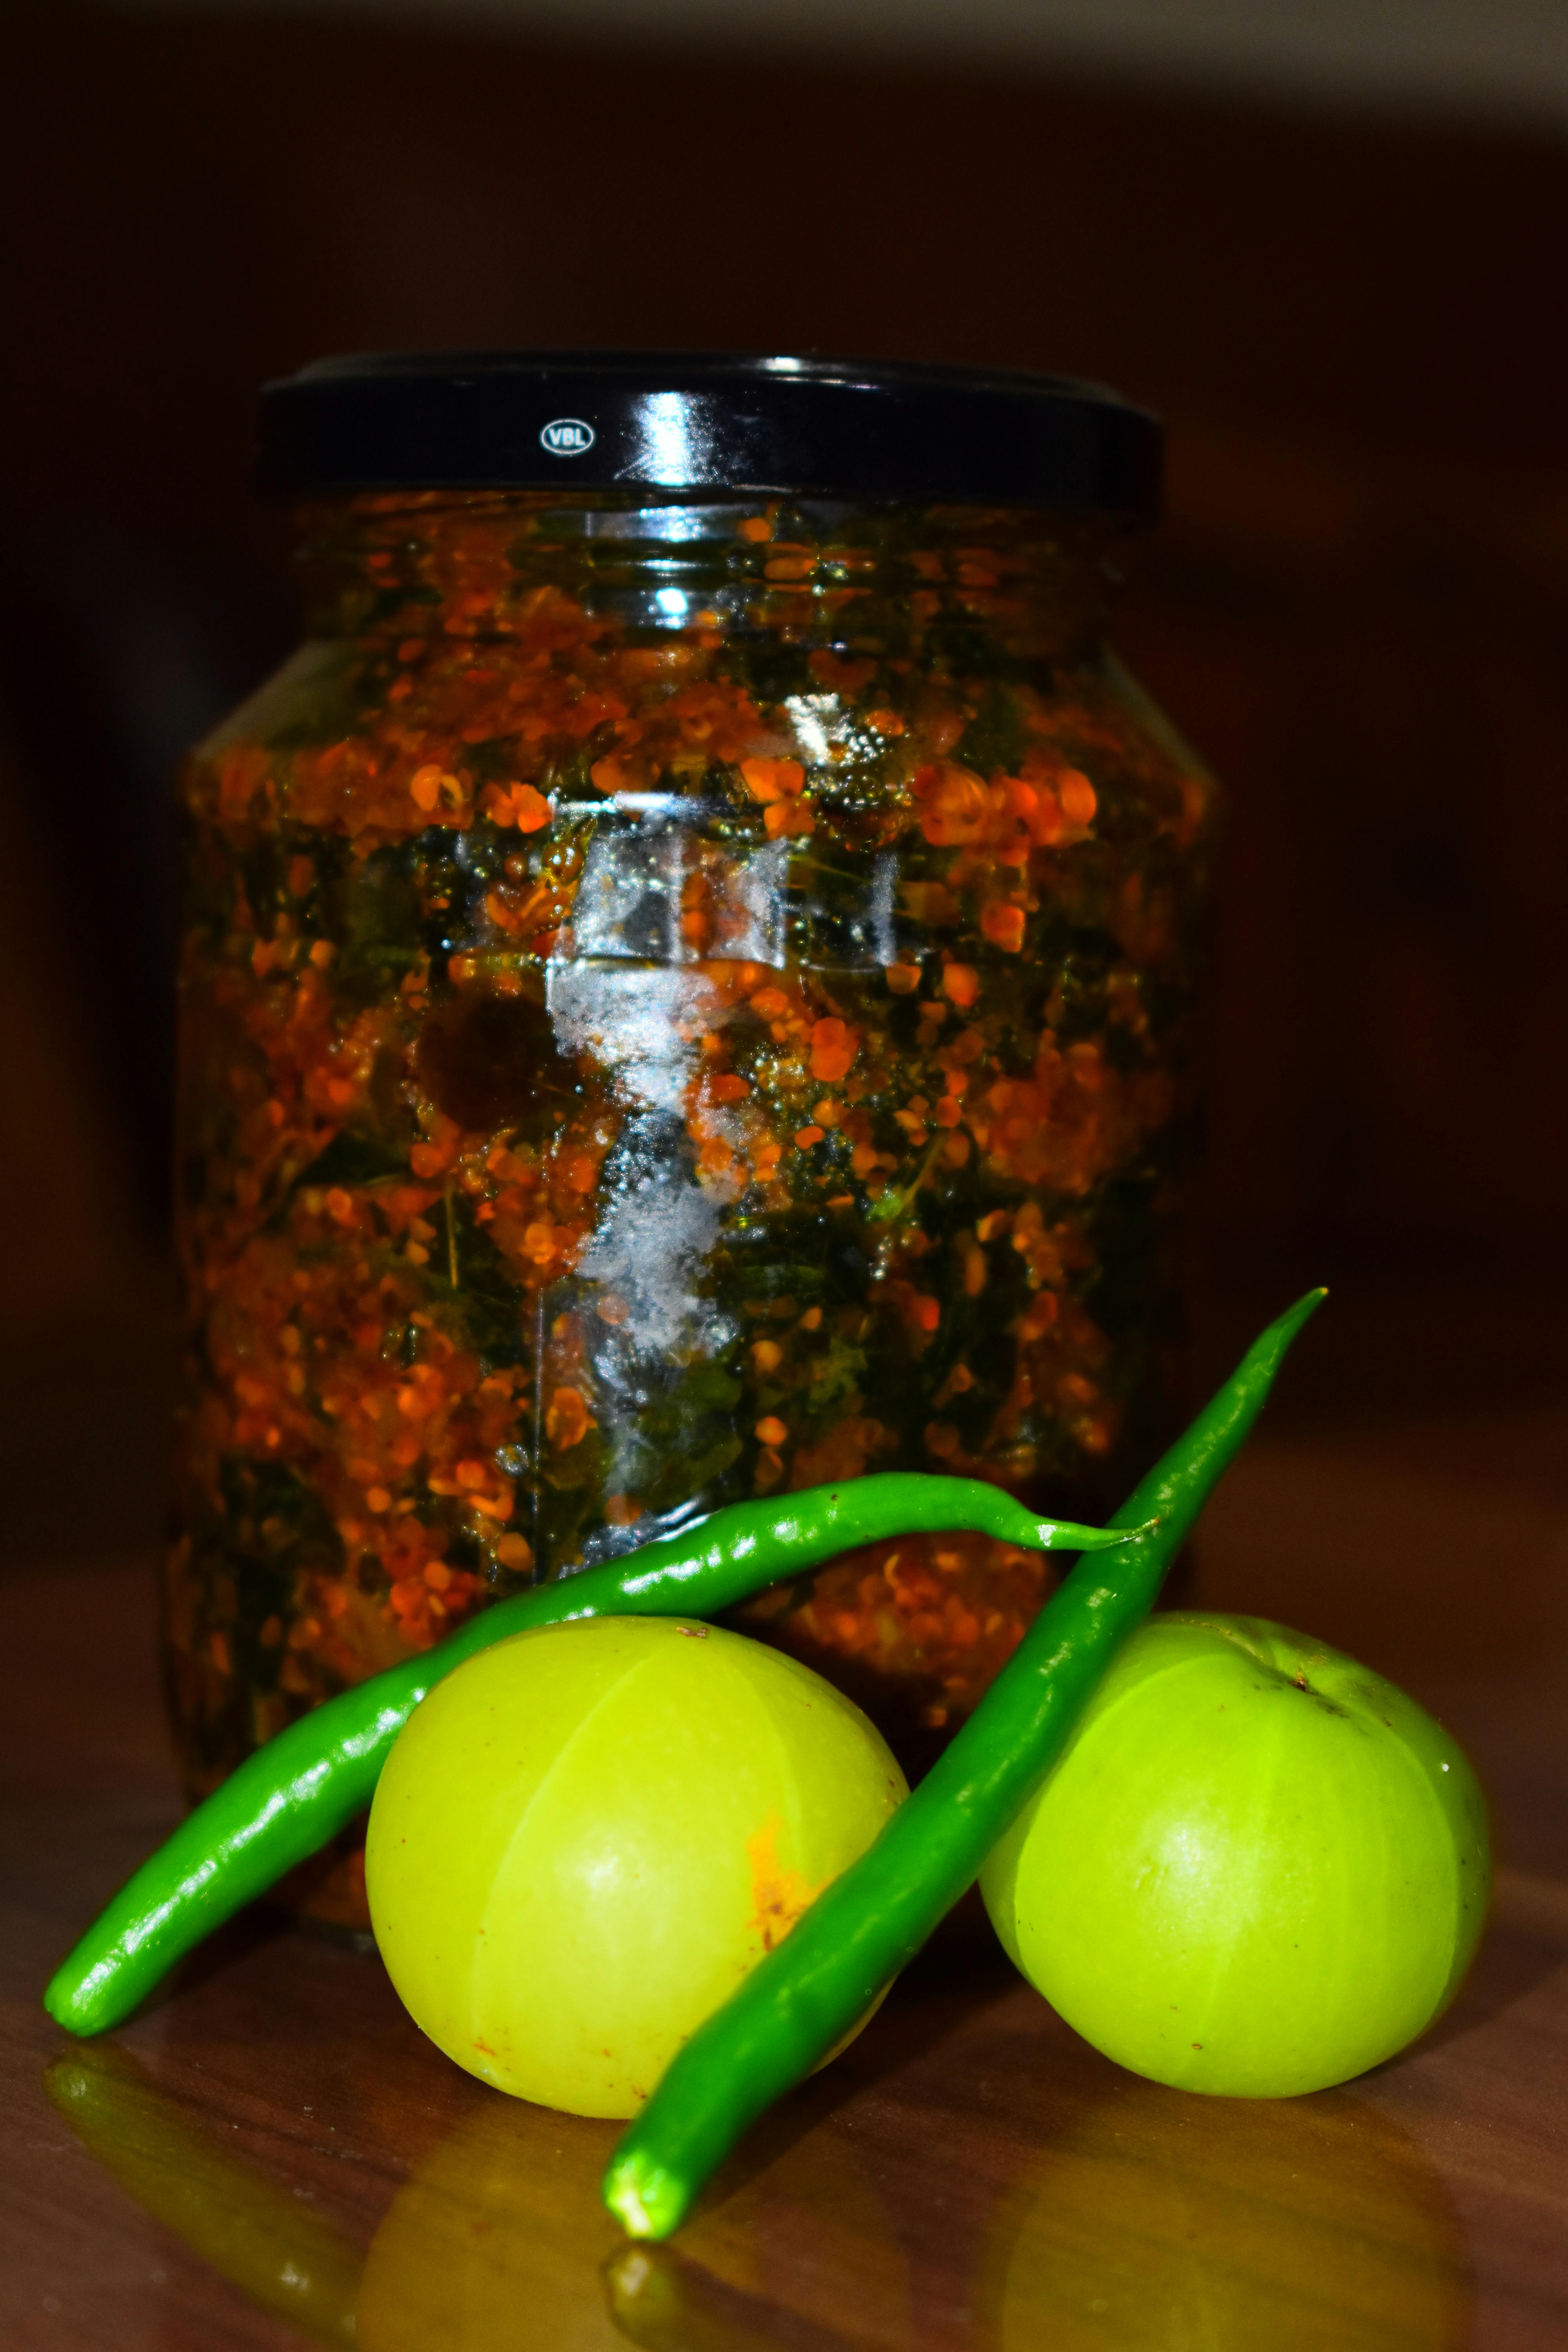 Free stock photo of glass jar, gooseberry, green chillies